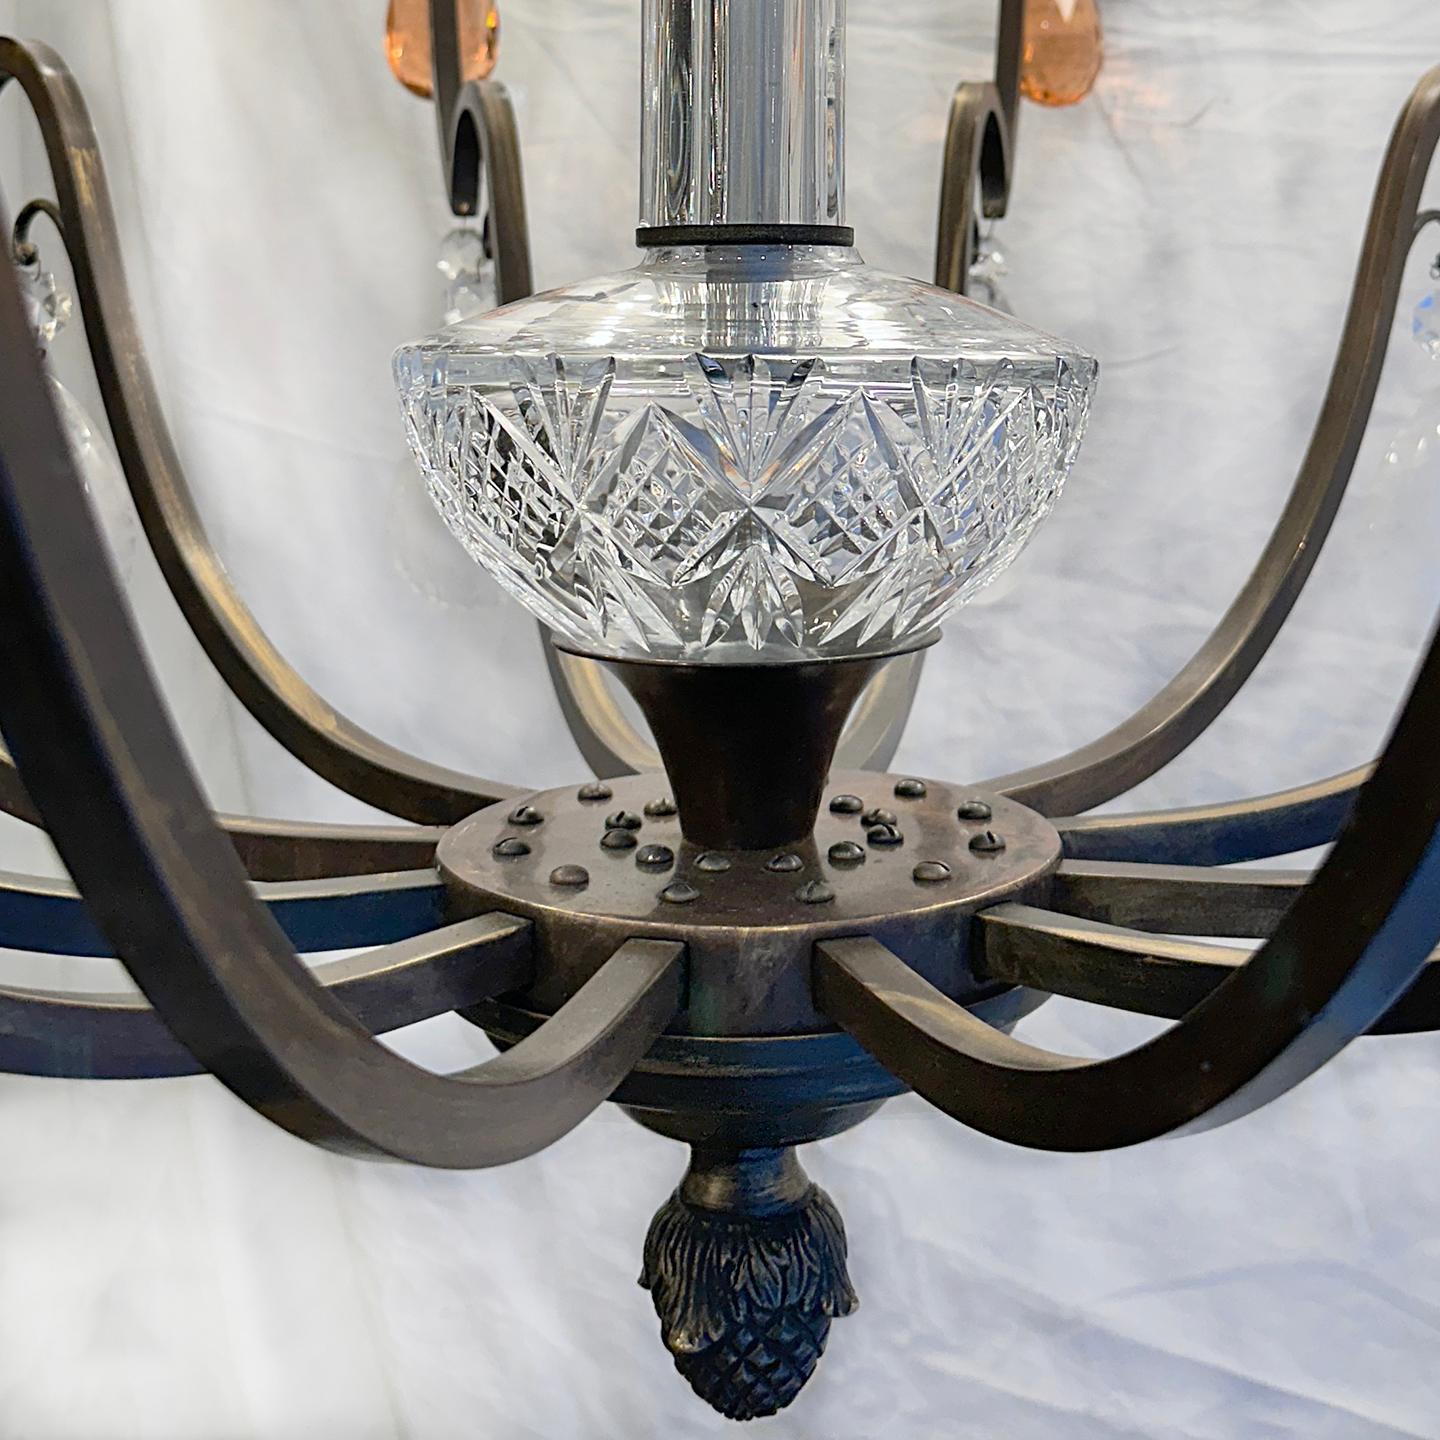 A large circa 1940's French chandelier with 12 lights and rock crystal pendants.

Measurements:
Minimum drop: 64